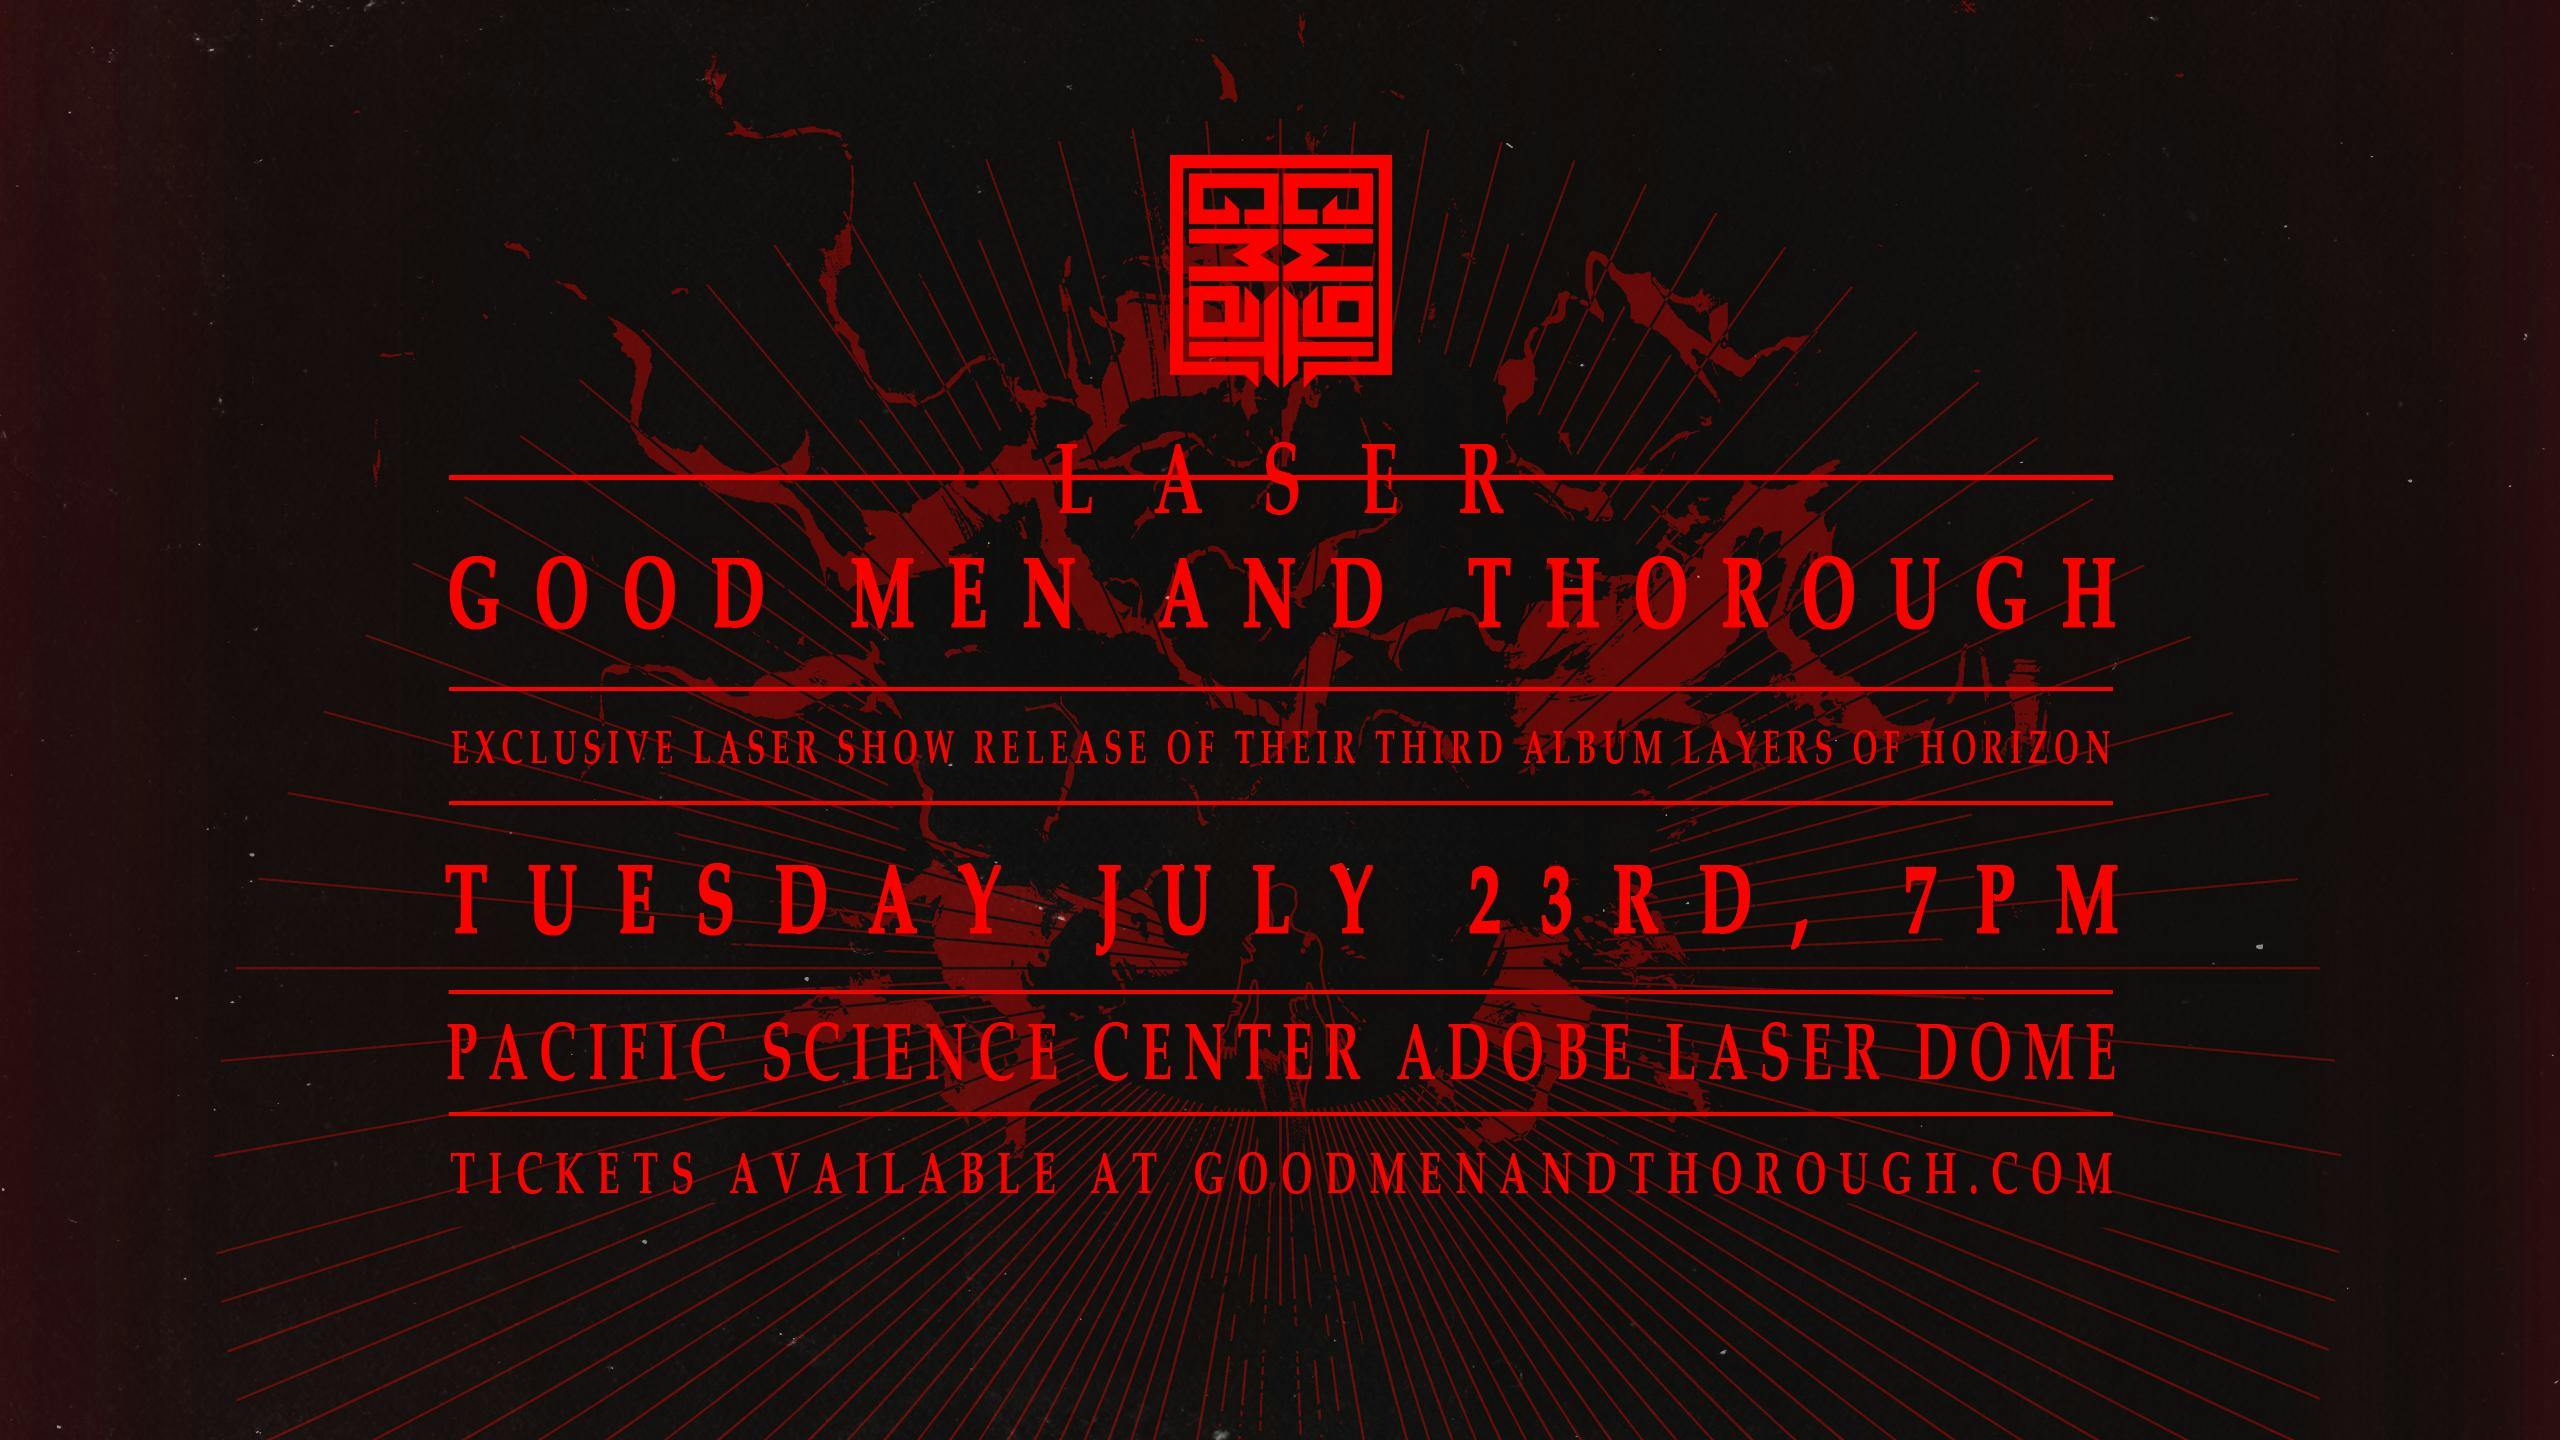 Laser Good Men and Thorough (3rd Album Release, Private Laser Show!)